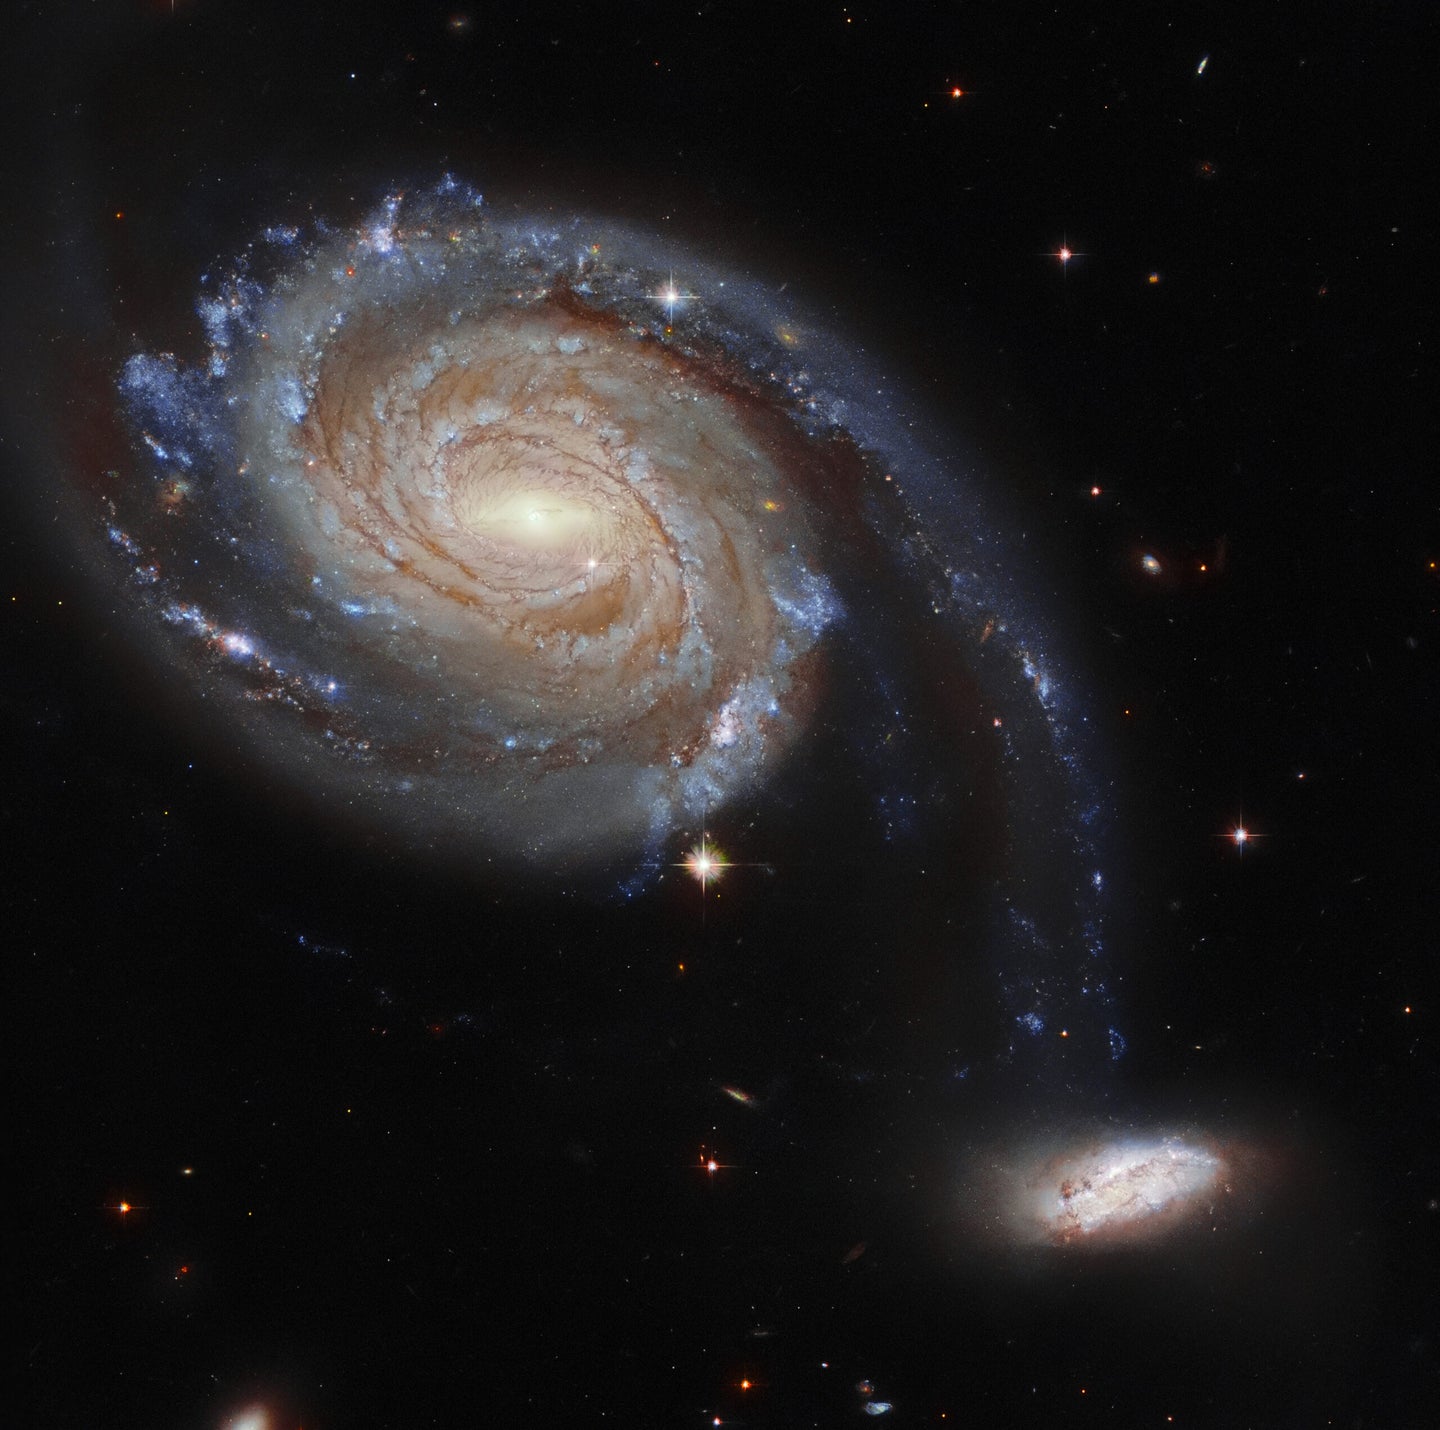 Hubble Space Telescope capture of distant galaxies Arp 86 and NGC 7753